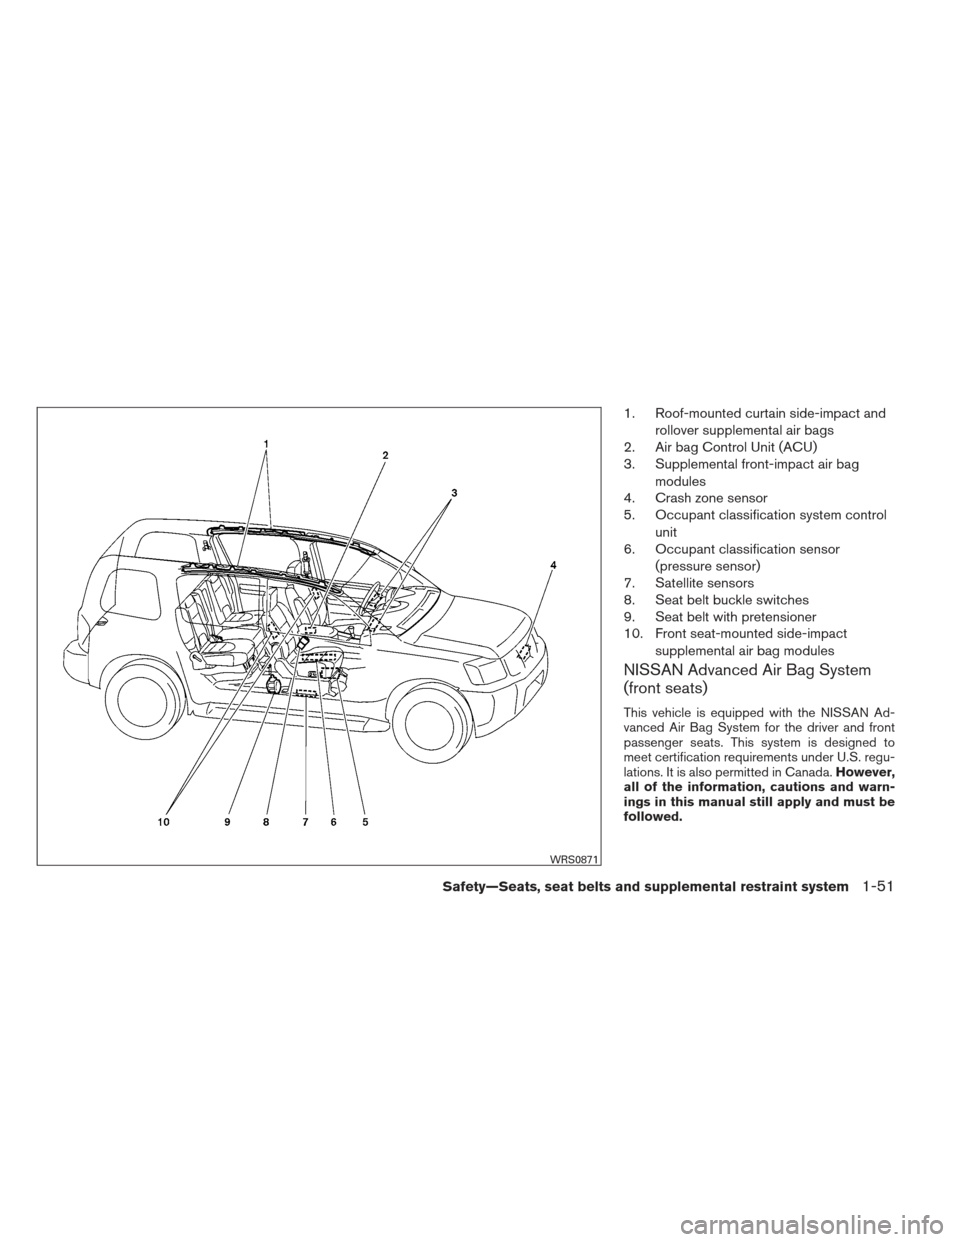 NISSAN XTERRA 2013 N50 / 2.G Owners Manual 1. Roof-mounted curtain side-impact androllover supplemental air bags
2. Air bag Control Unit (ACU)
3. Supplemental front-impact air bag
modules
4. Crash zone sensor
5. Occupant classification system 